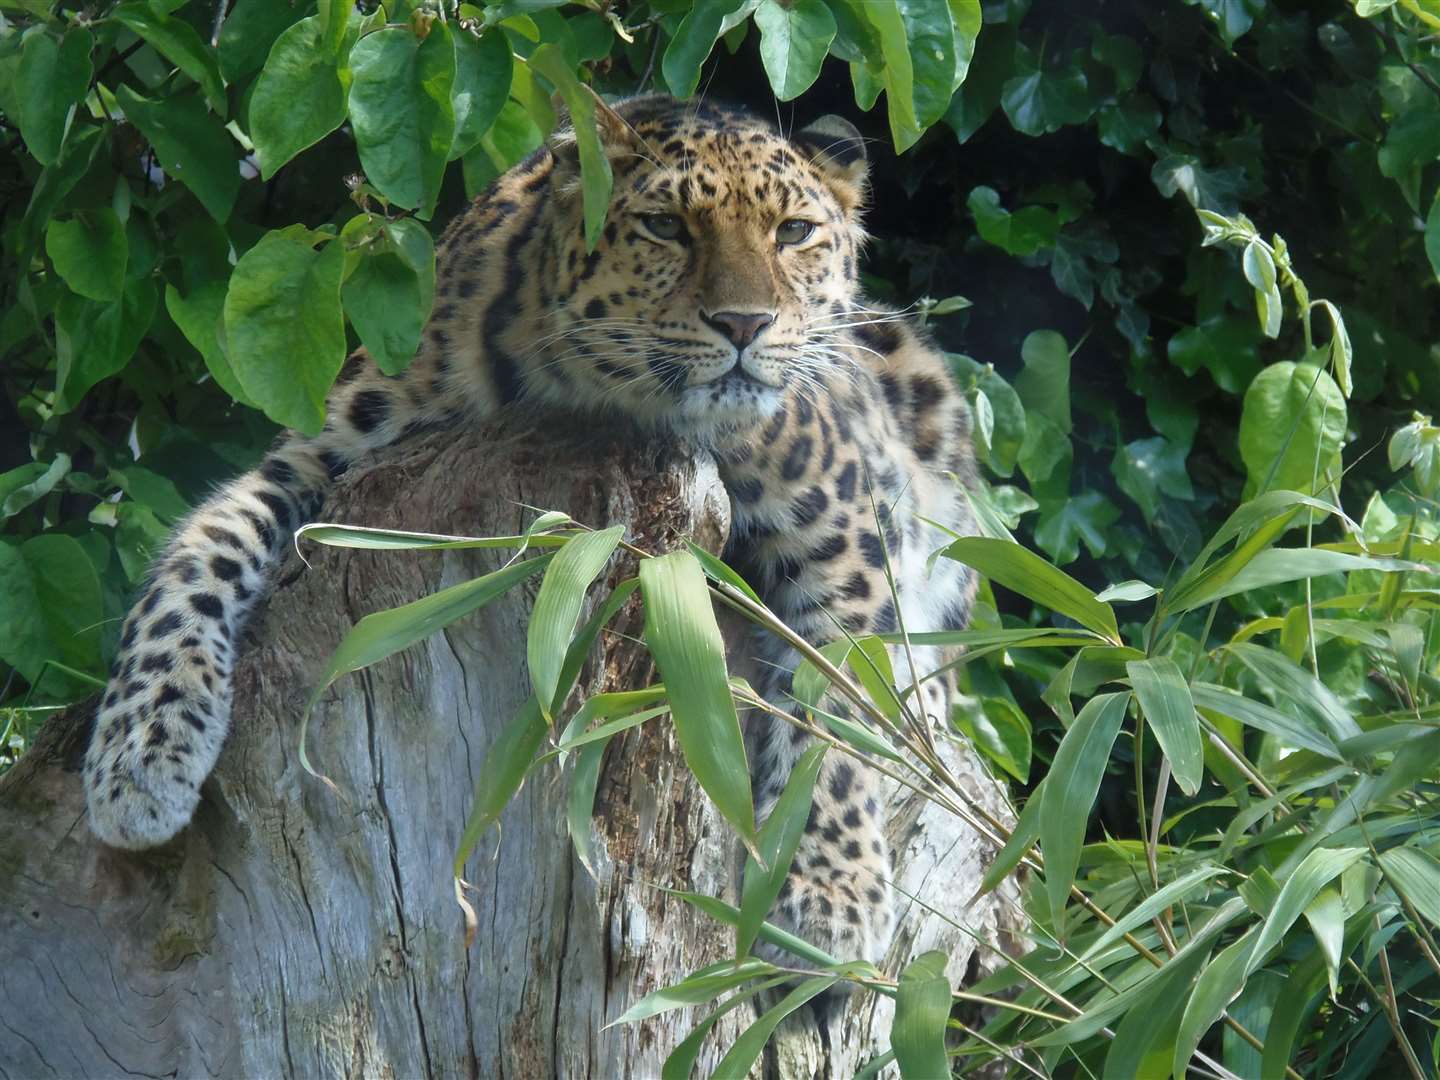 The accommodation will neighbour an Amur leopard enclosure